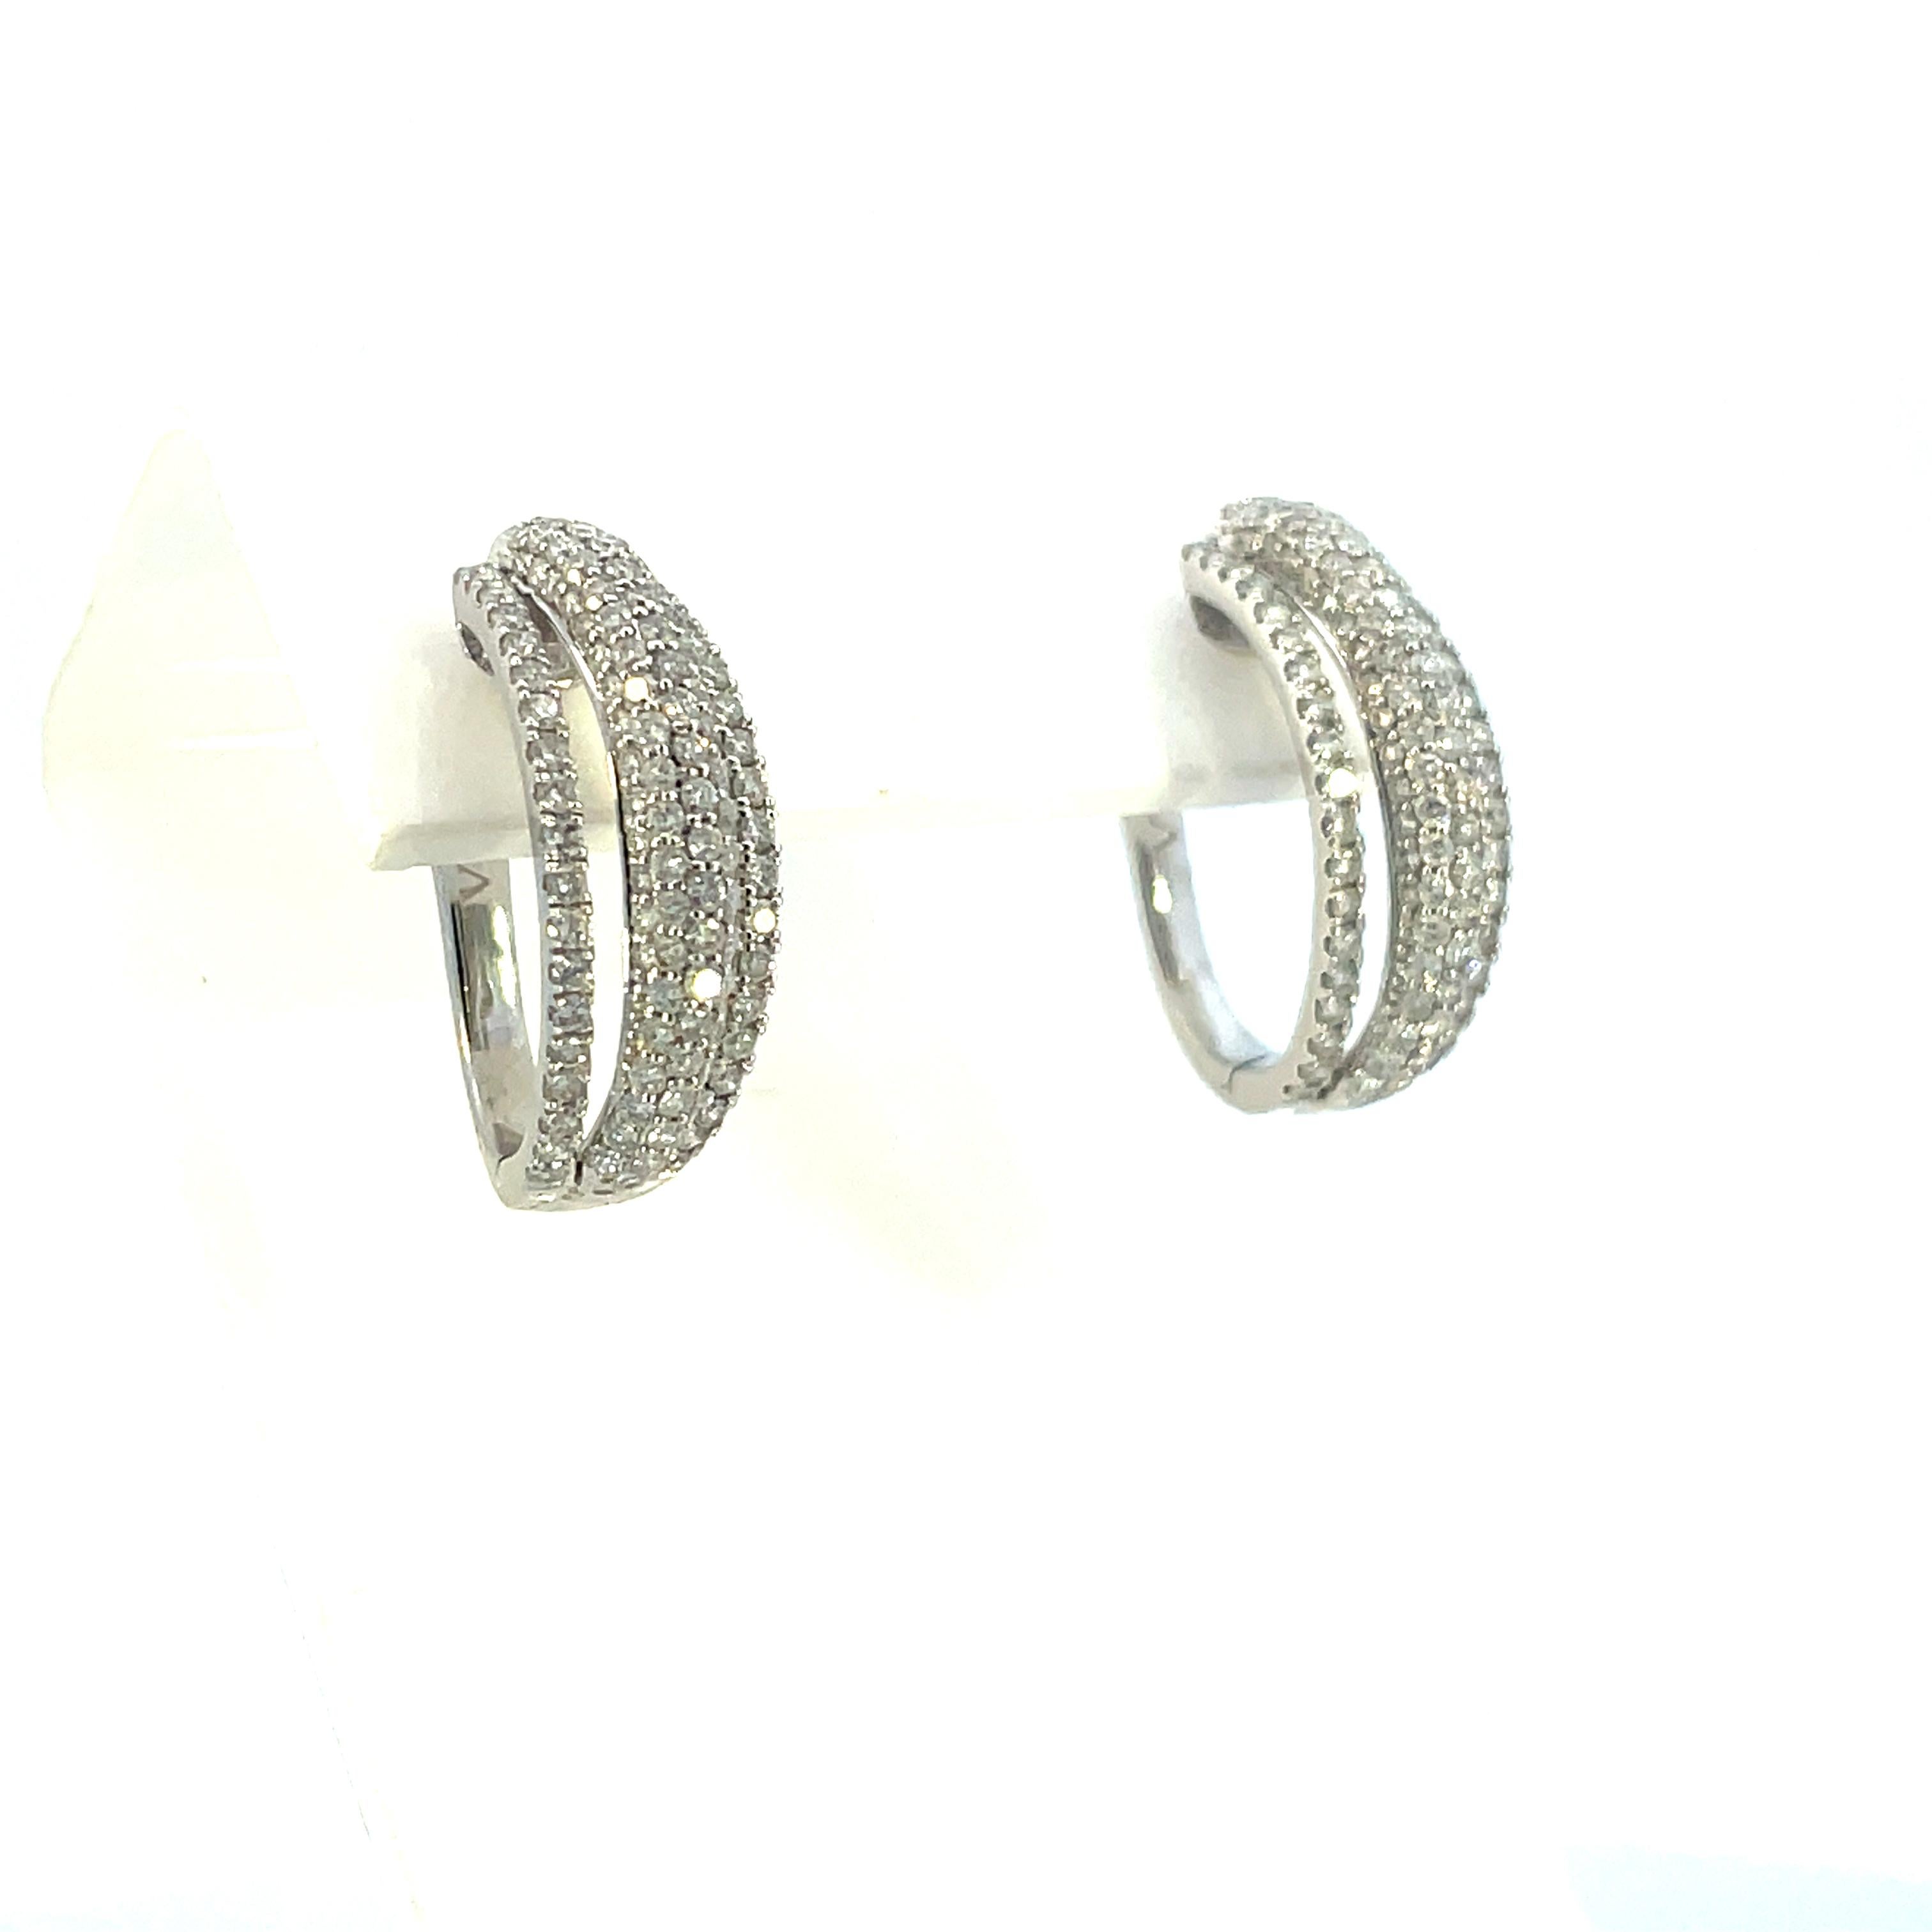 This is an incredible pair of Contemporary 18K white gold  earrings featuring three rows of finely set SI1 in clarity and F/G colored round diamonds. 

These white gold earrings feature 3 sets of bands containing five rows of diamonds, each